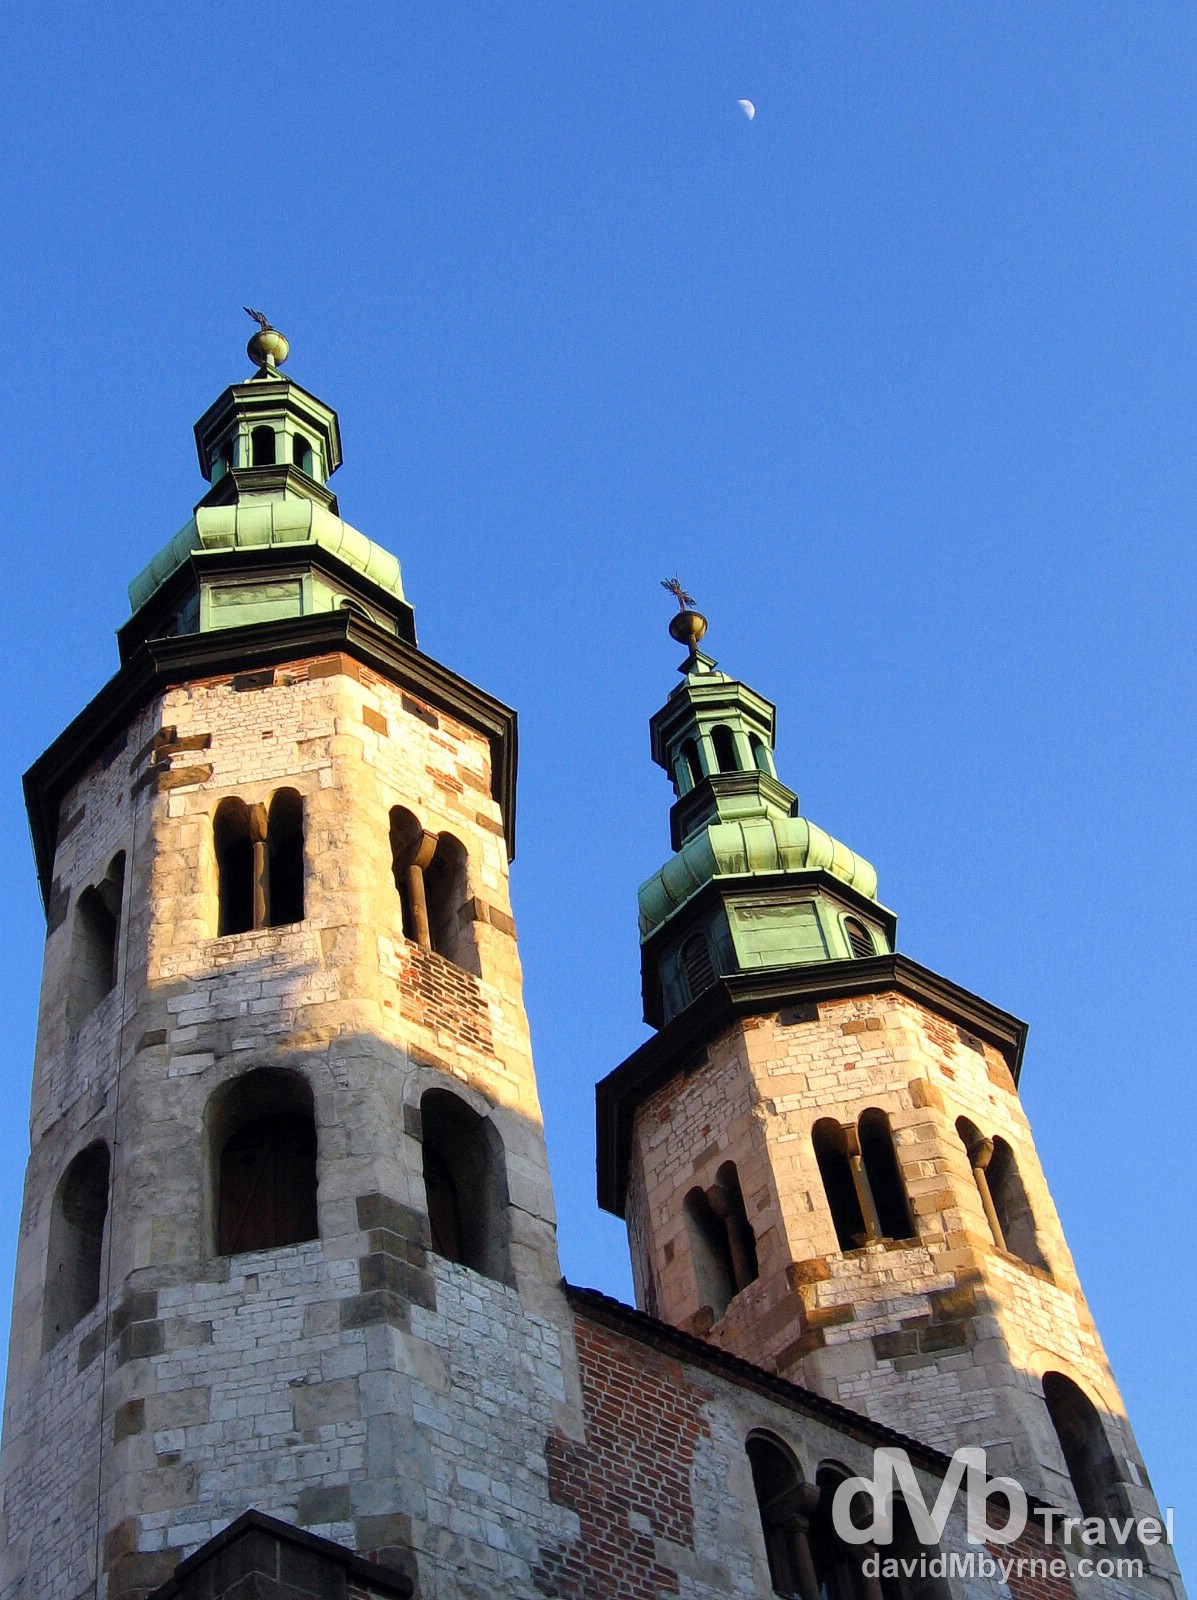 The twin towers of Saint Andrew’s Church, one of the oldest buildings in the Old Town of Krakow, Poland. March 6th 2006.